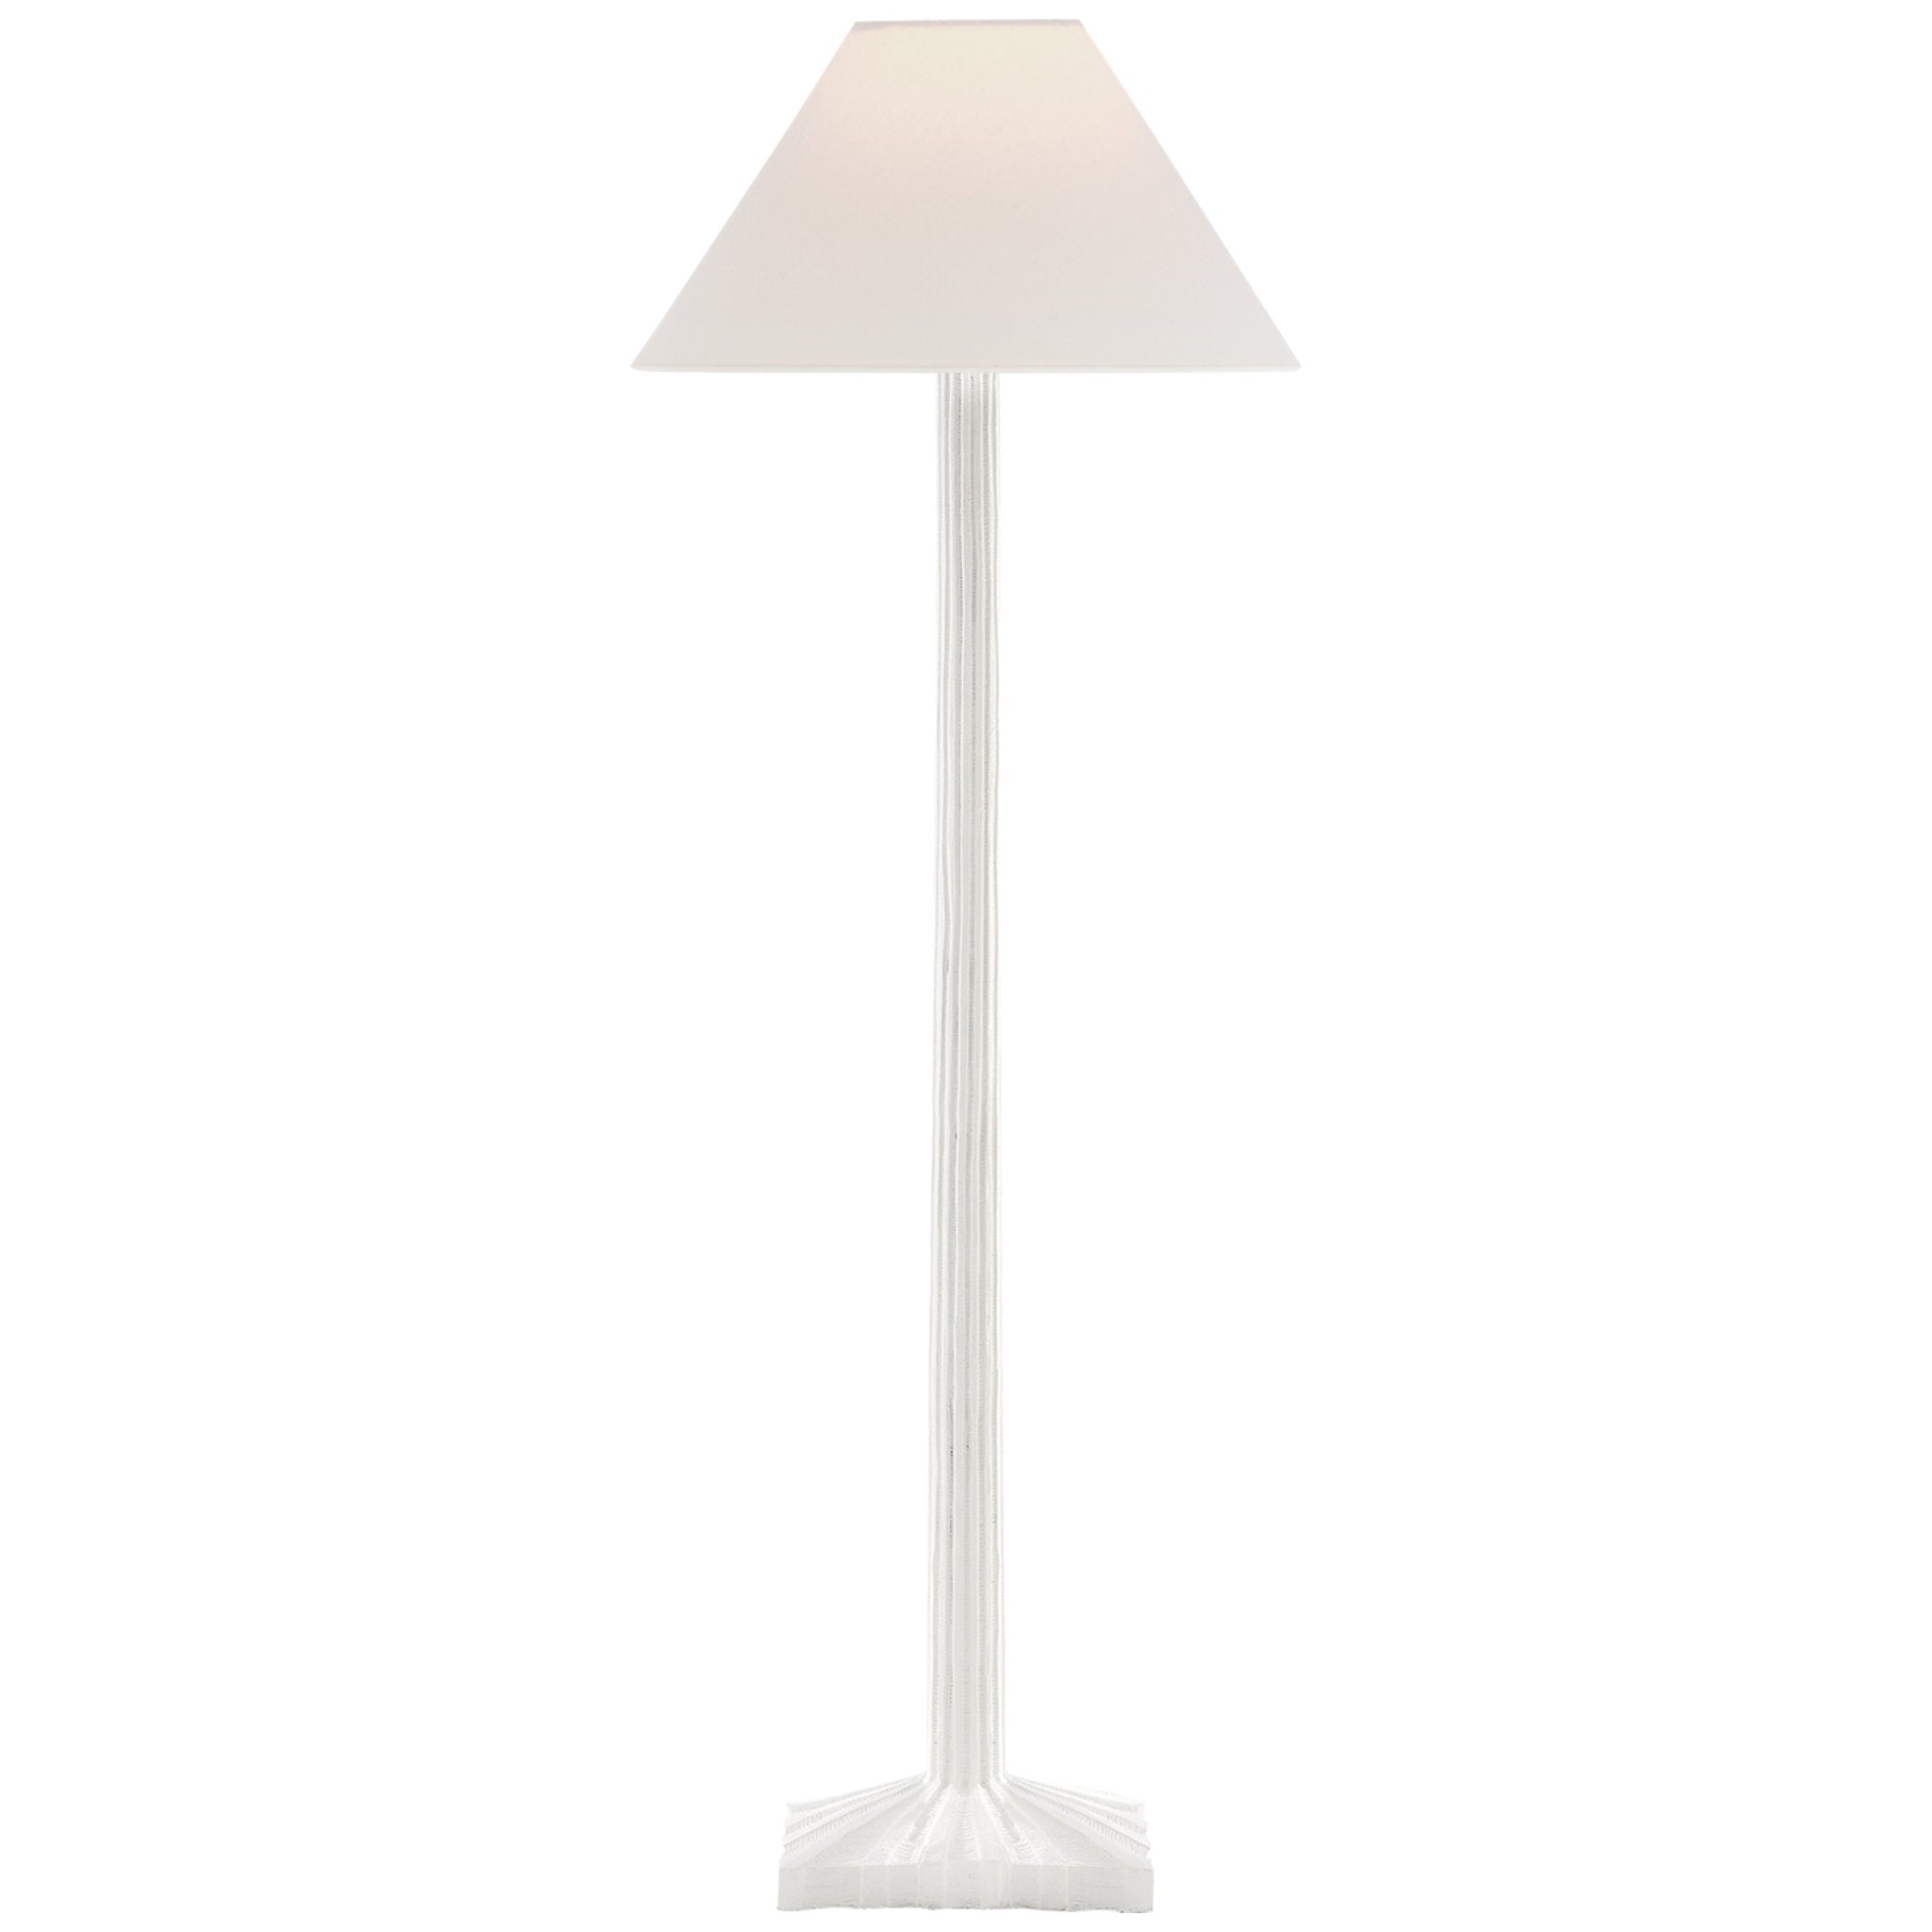 Chapman & Myers Strie Buffet Lamp in Plaster White with Linen Shade